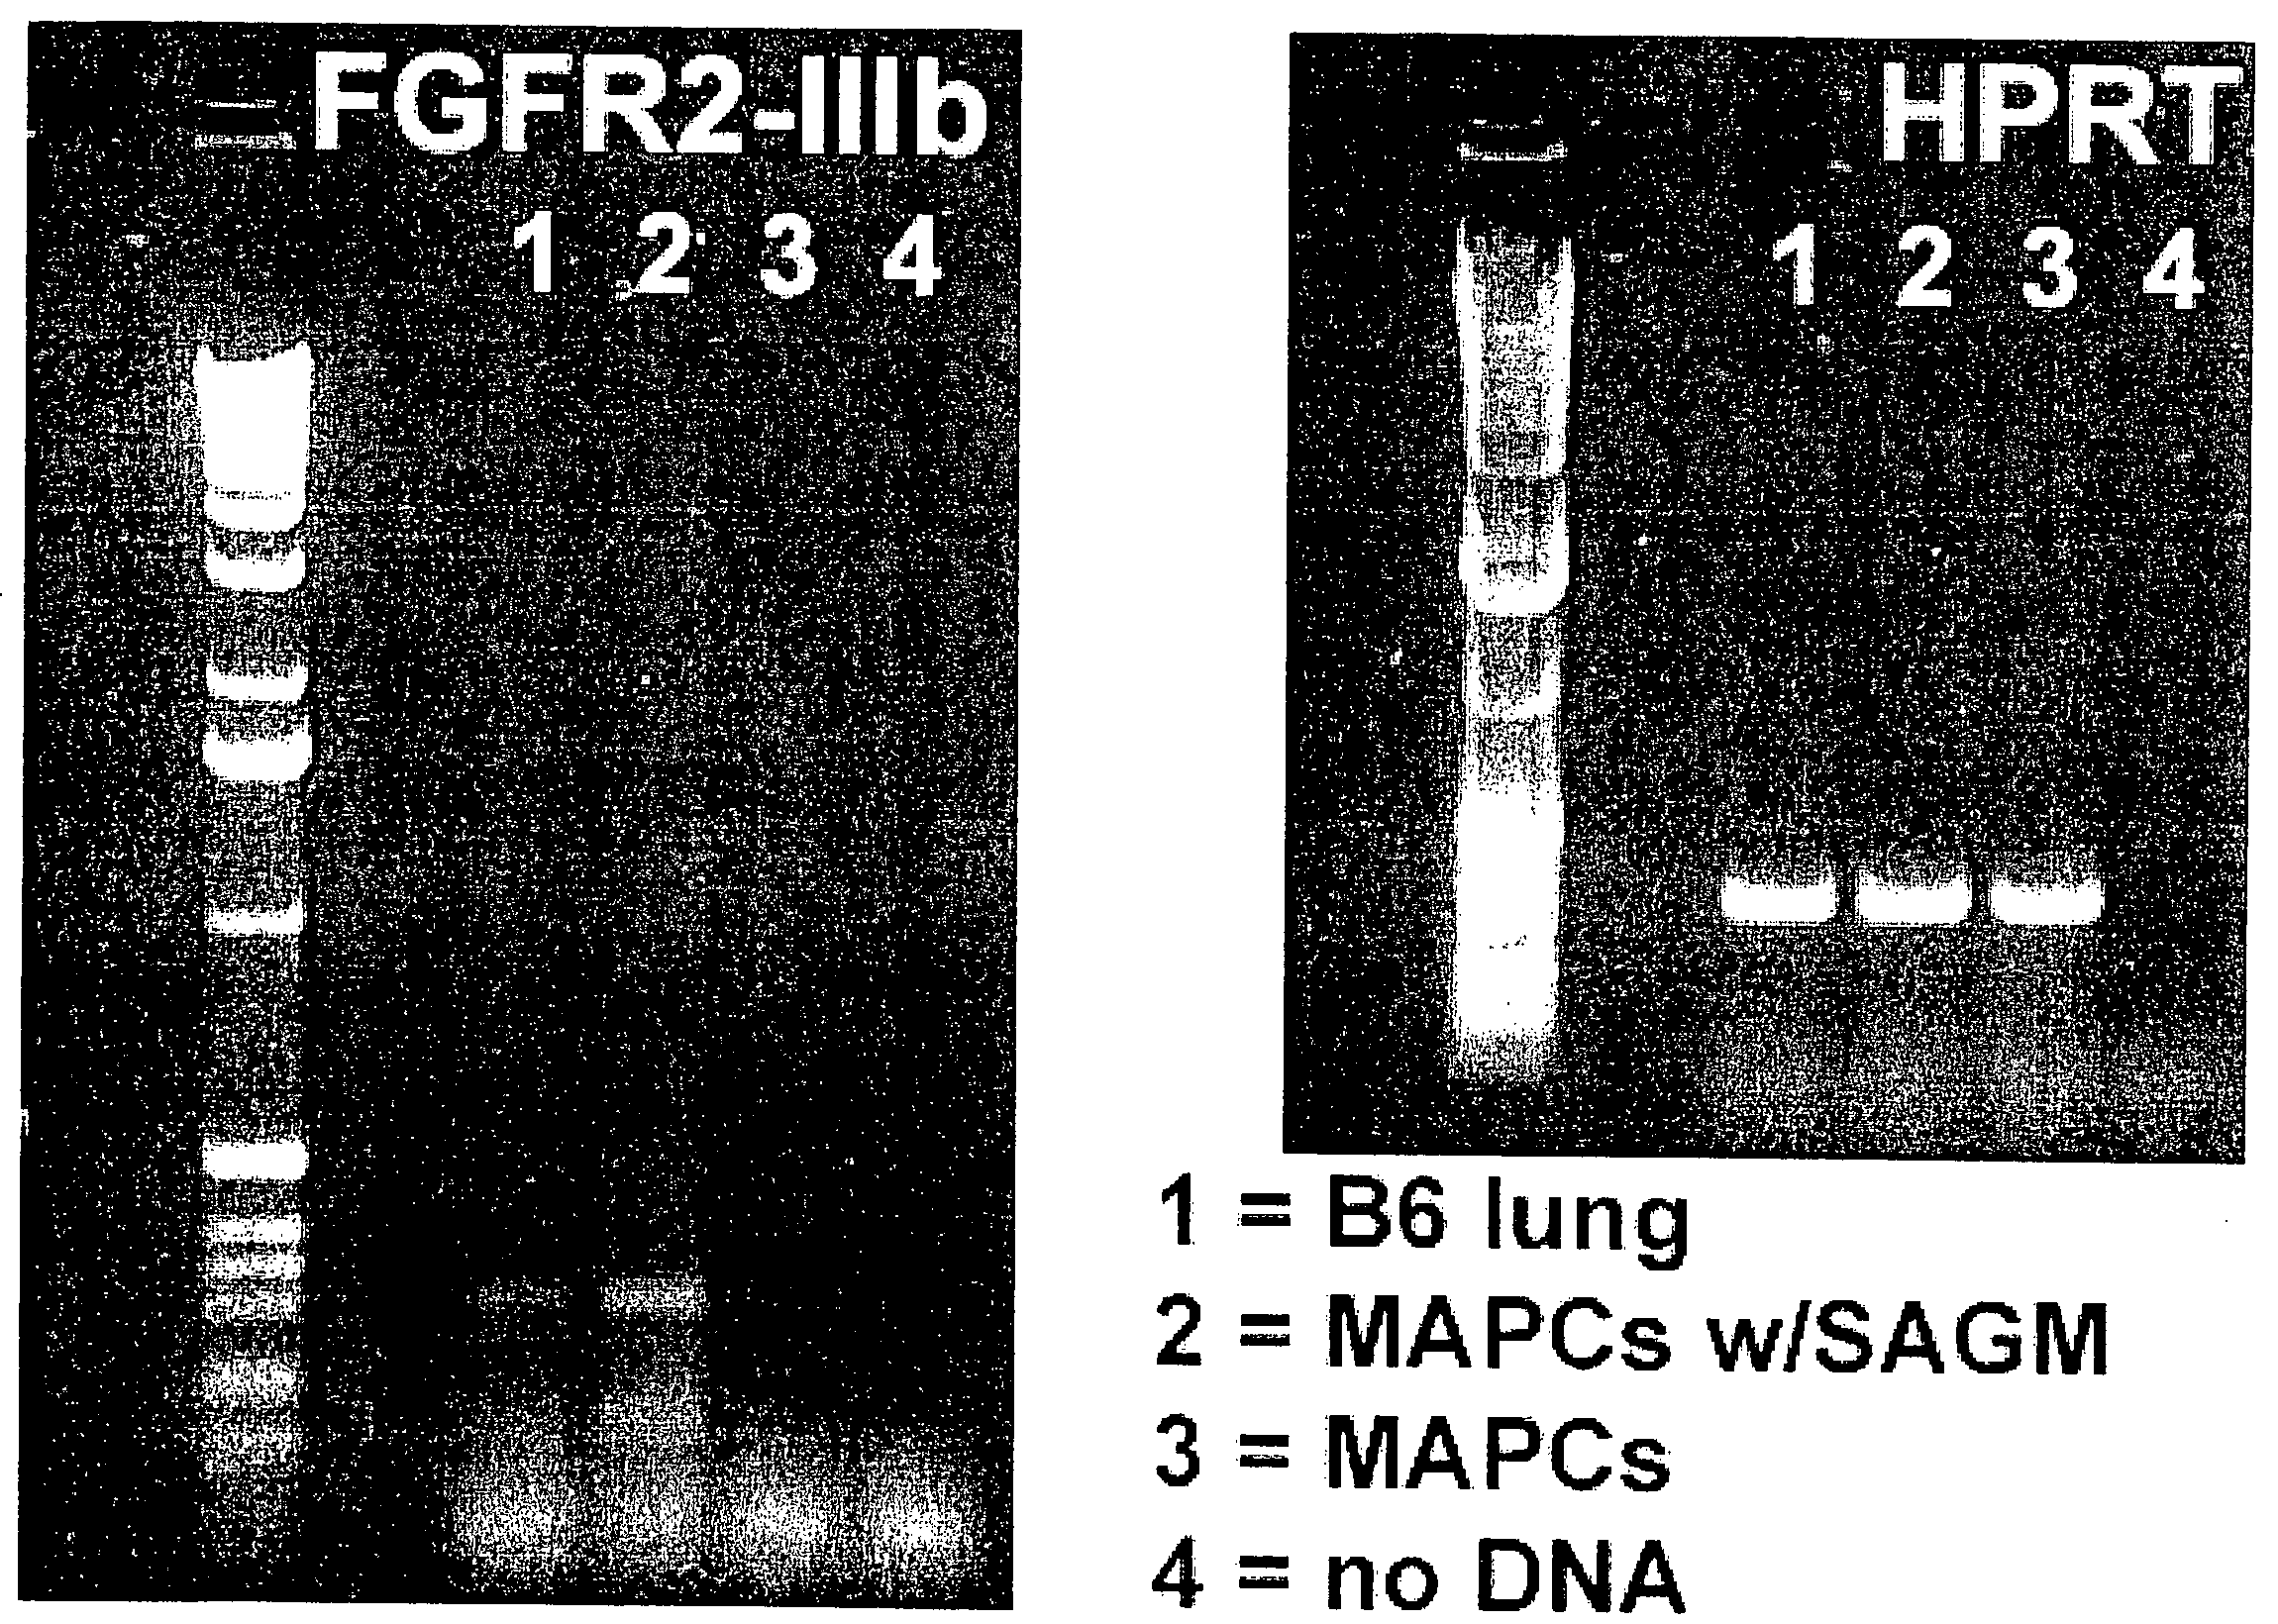 Mapc Generation of Lung Tissue